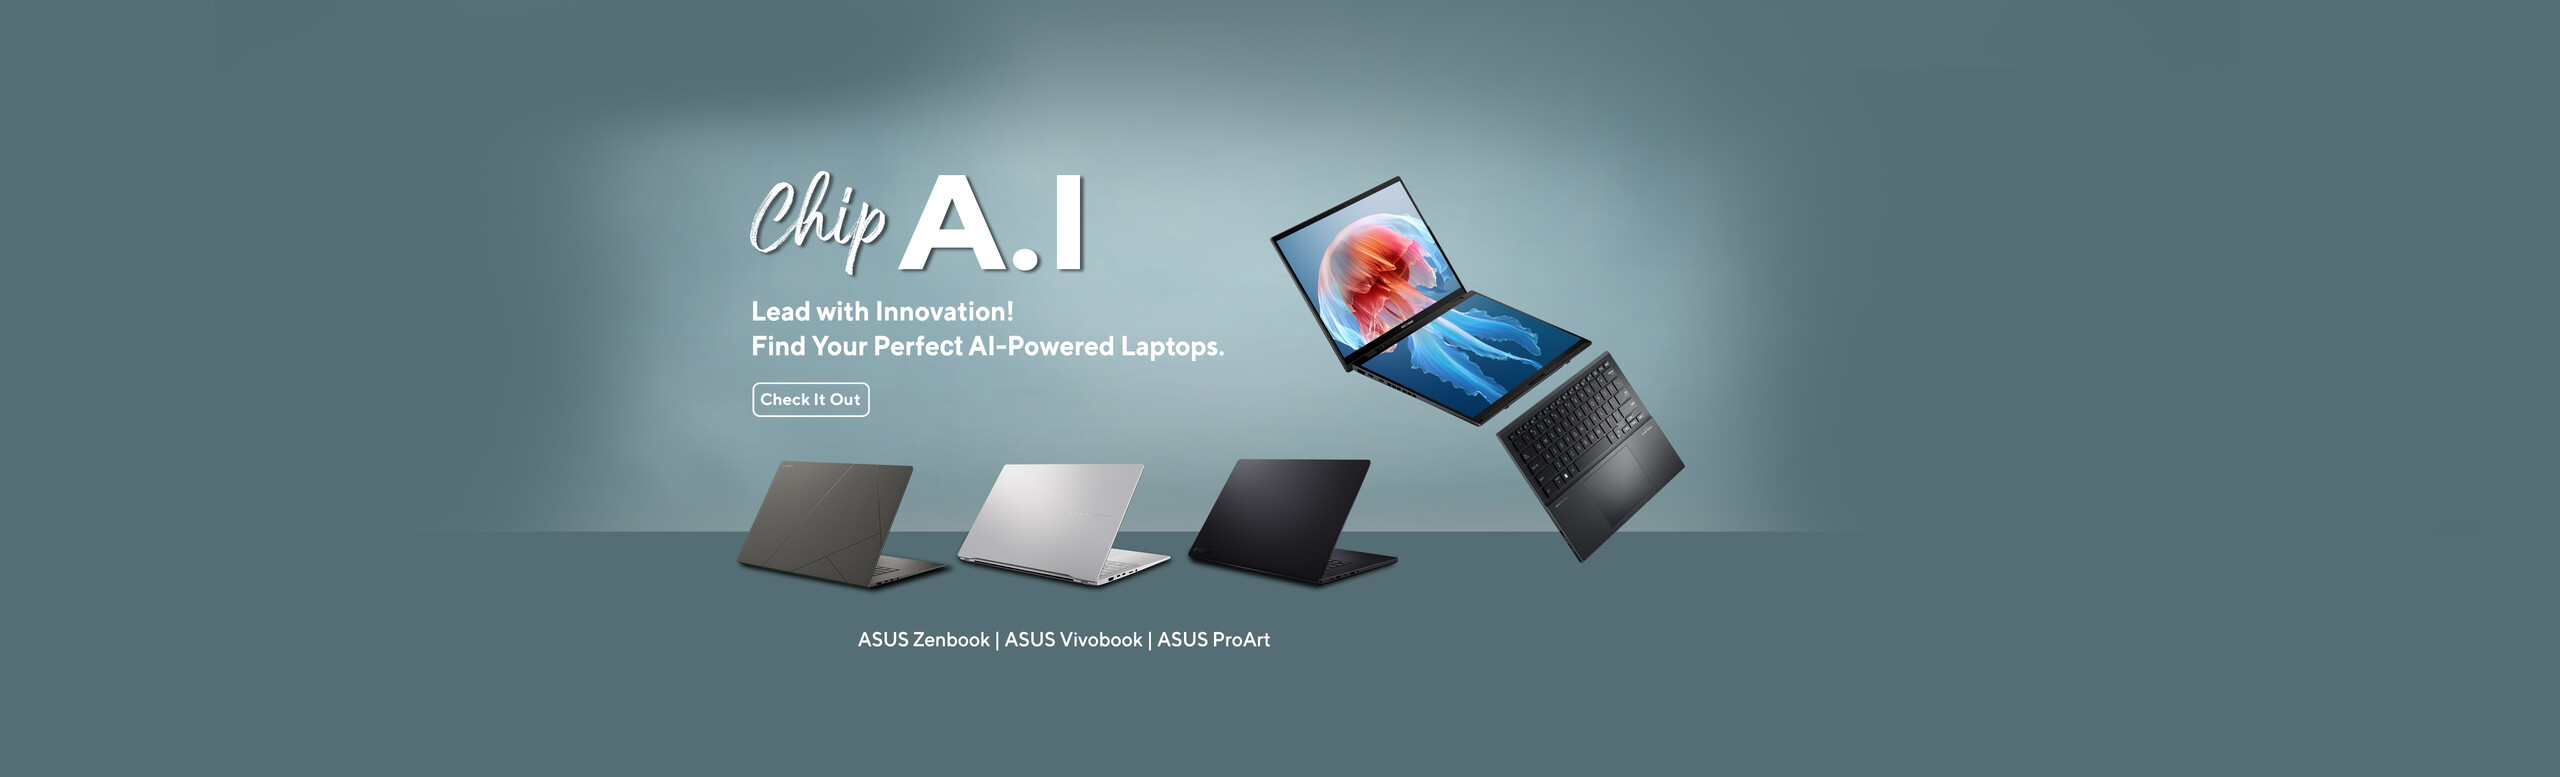 ASUS Laptops with AI and Windows Copilot